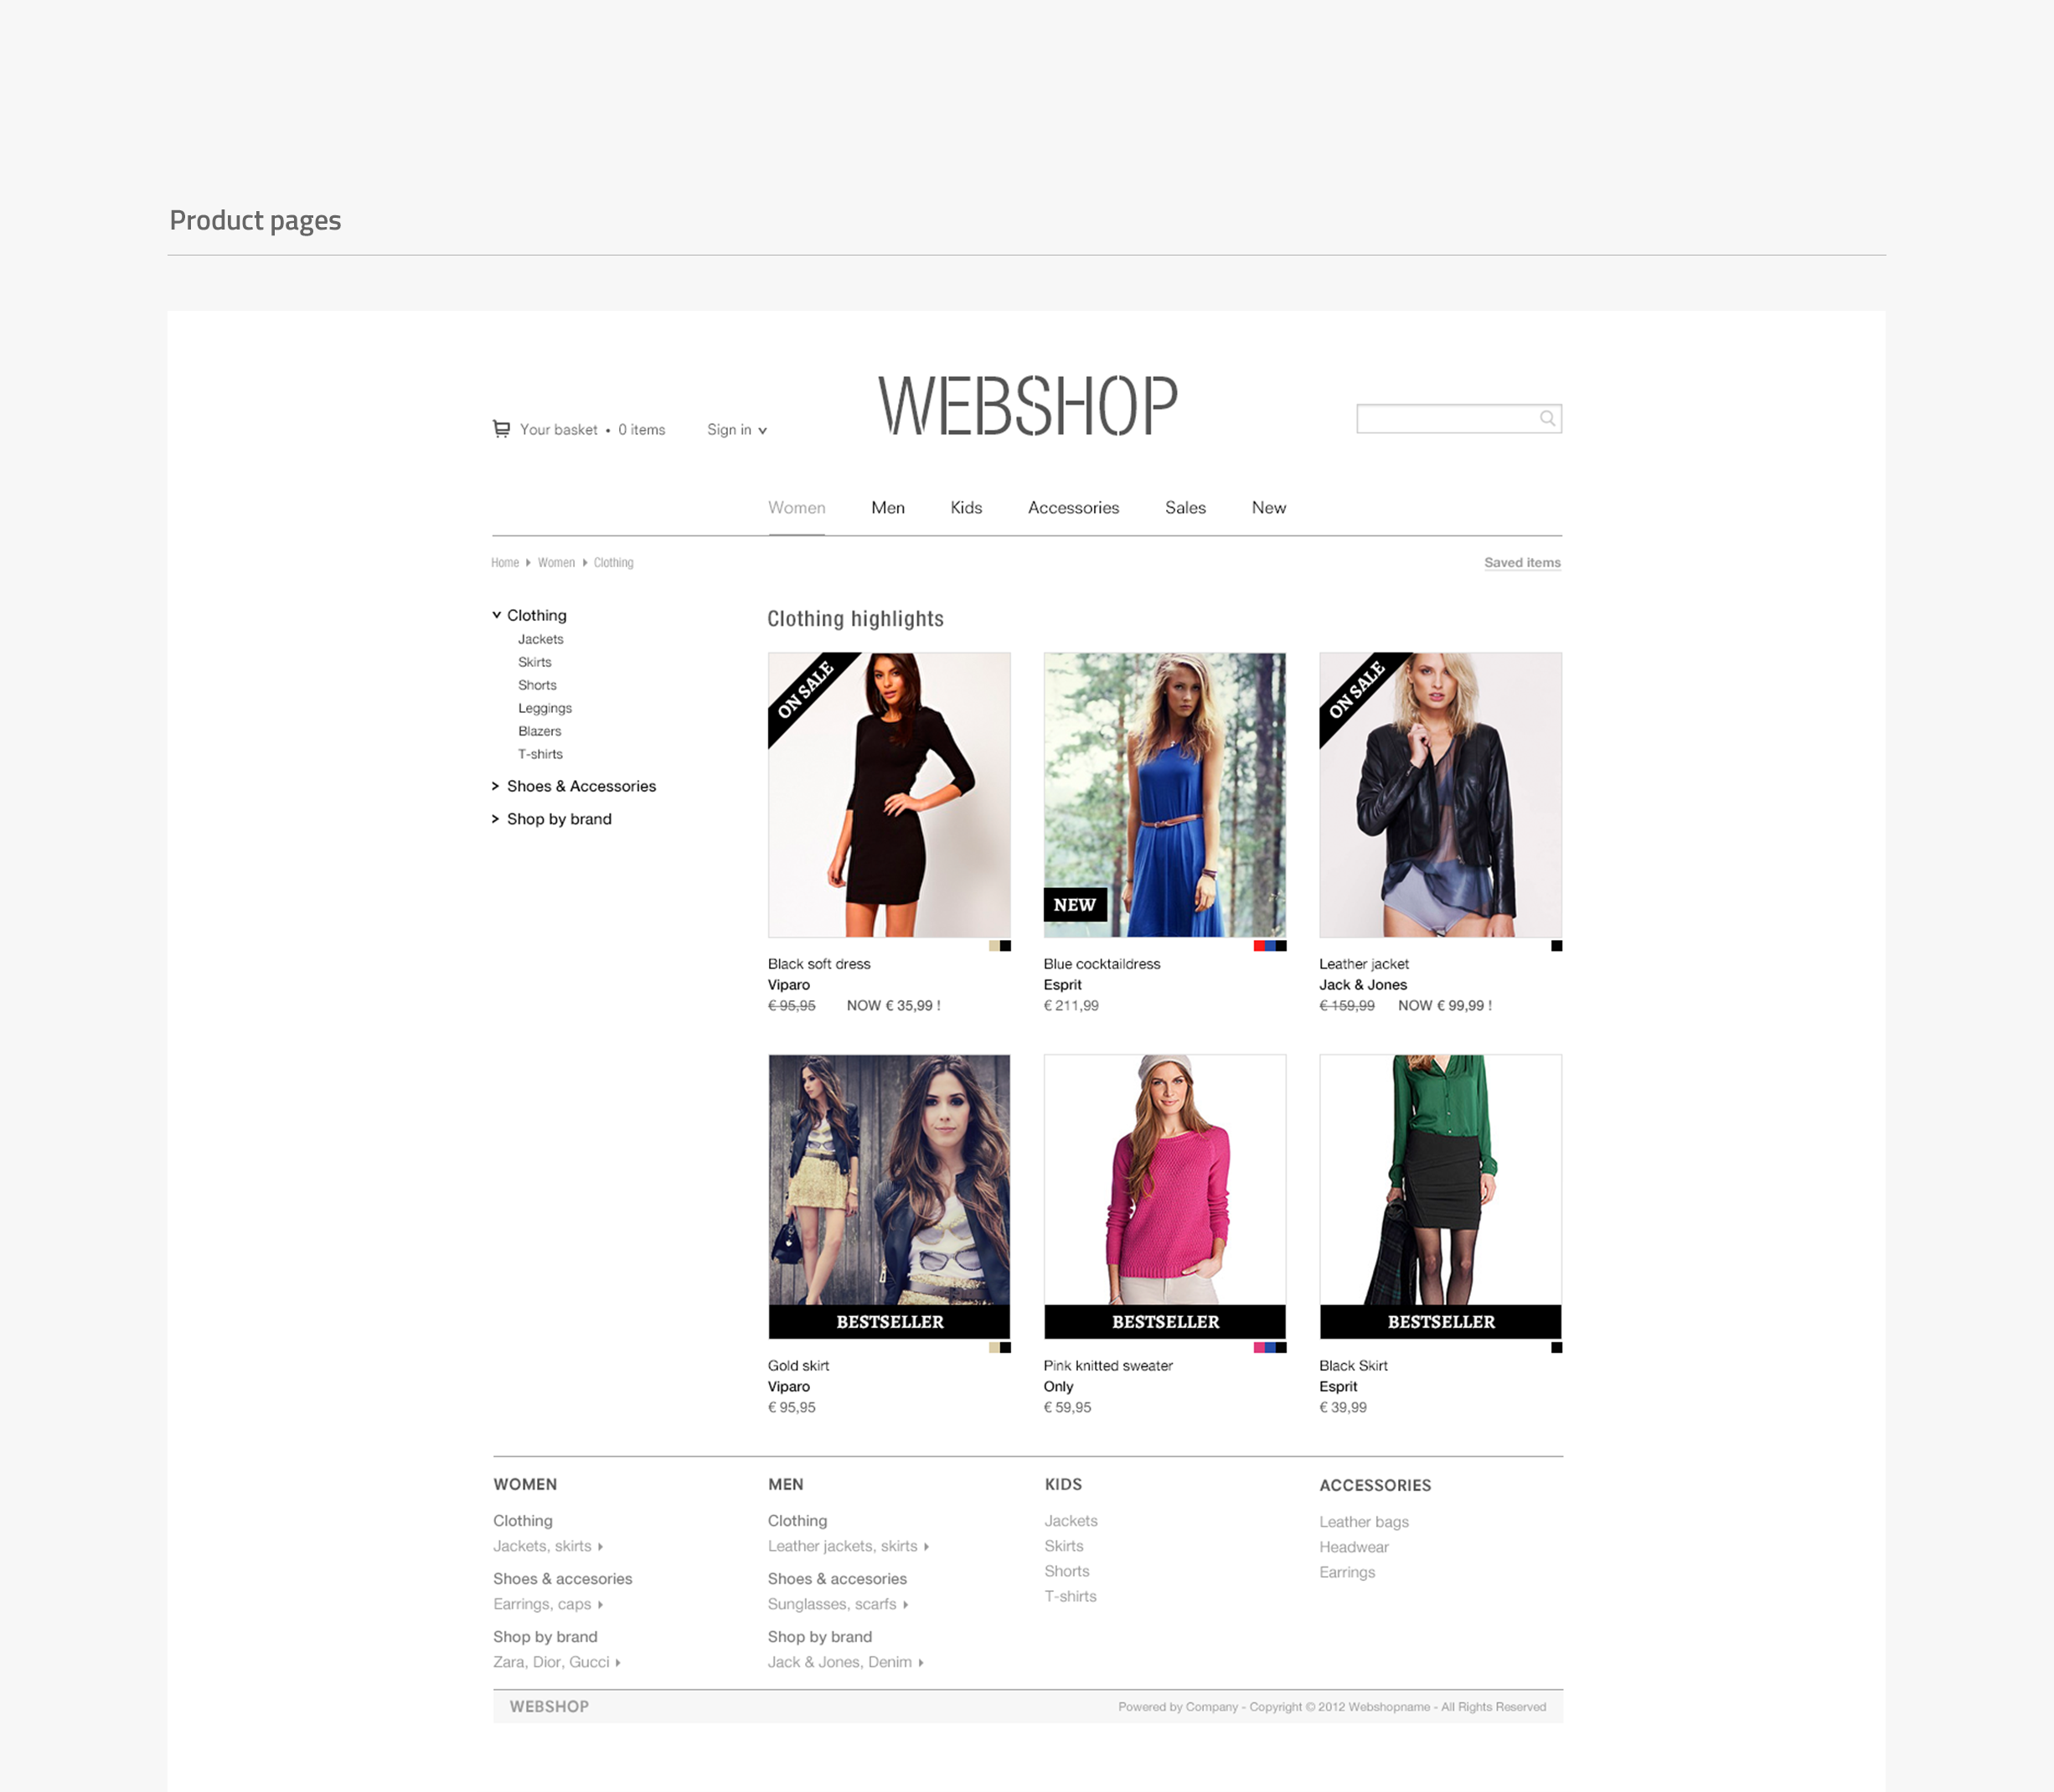 Webshop layout - product pages